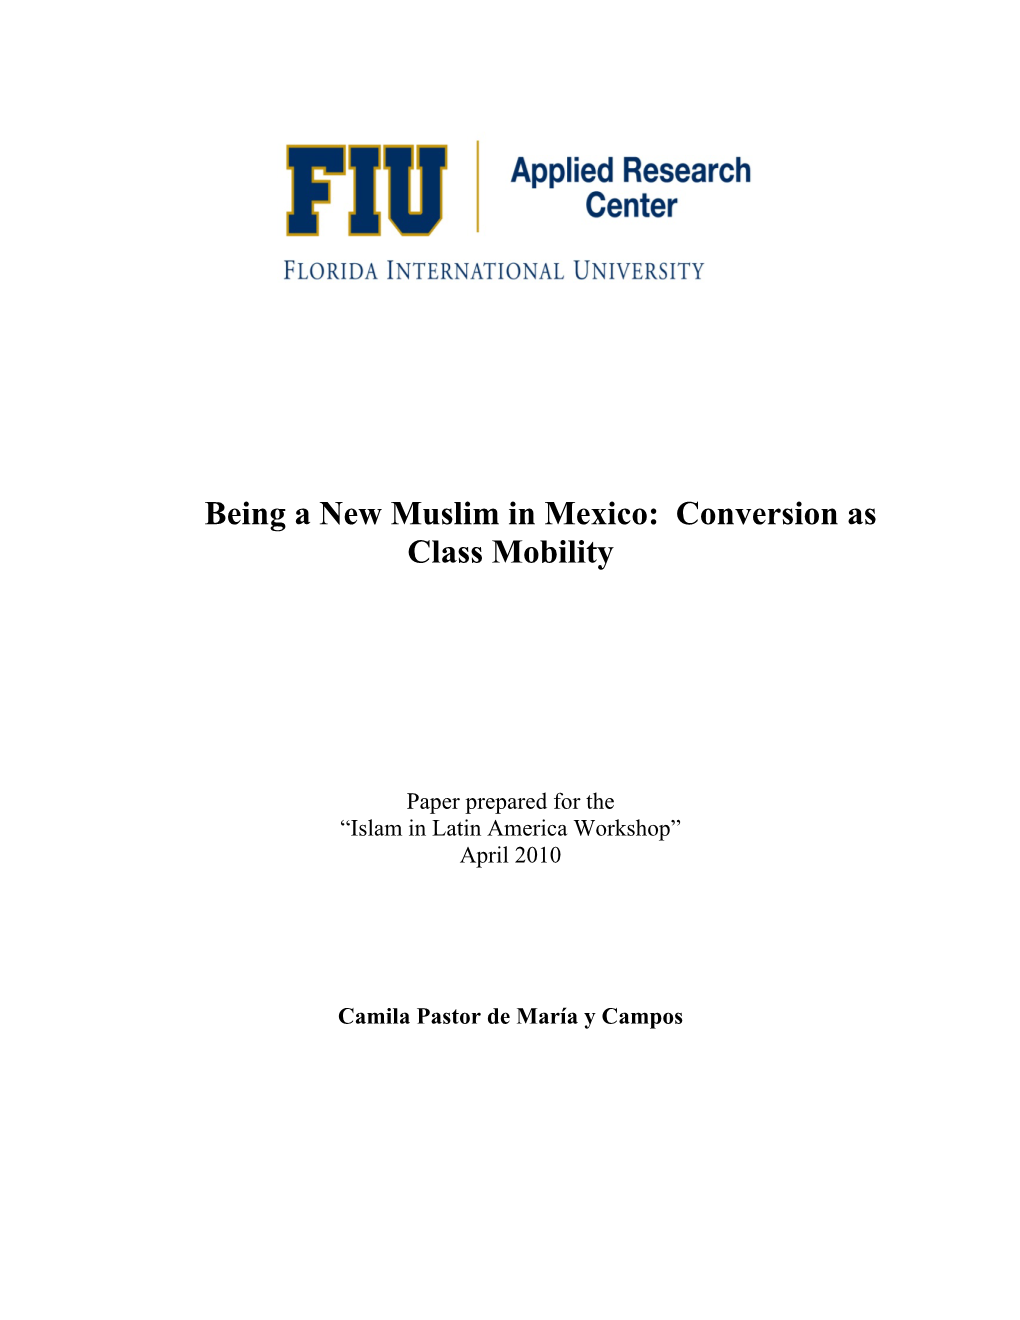 Being a New Muslim in Mexico: Conversion As Class Mobility